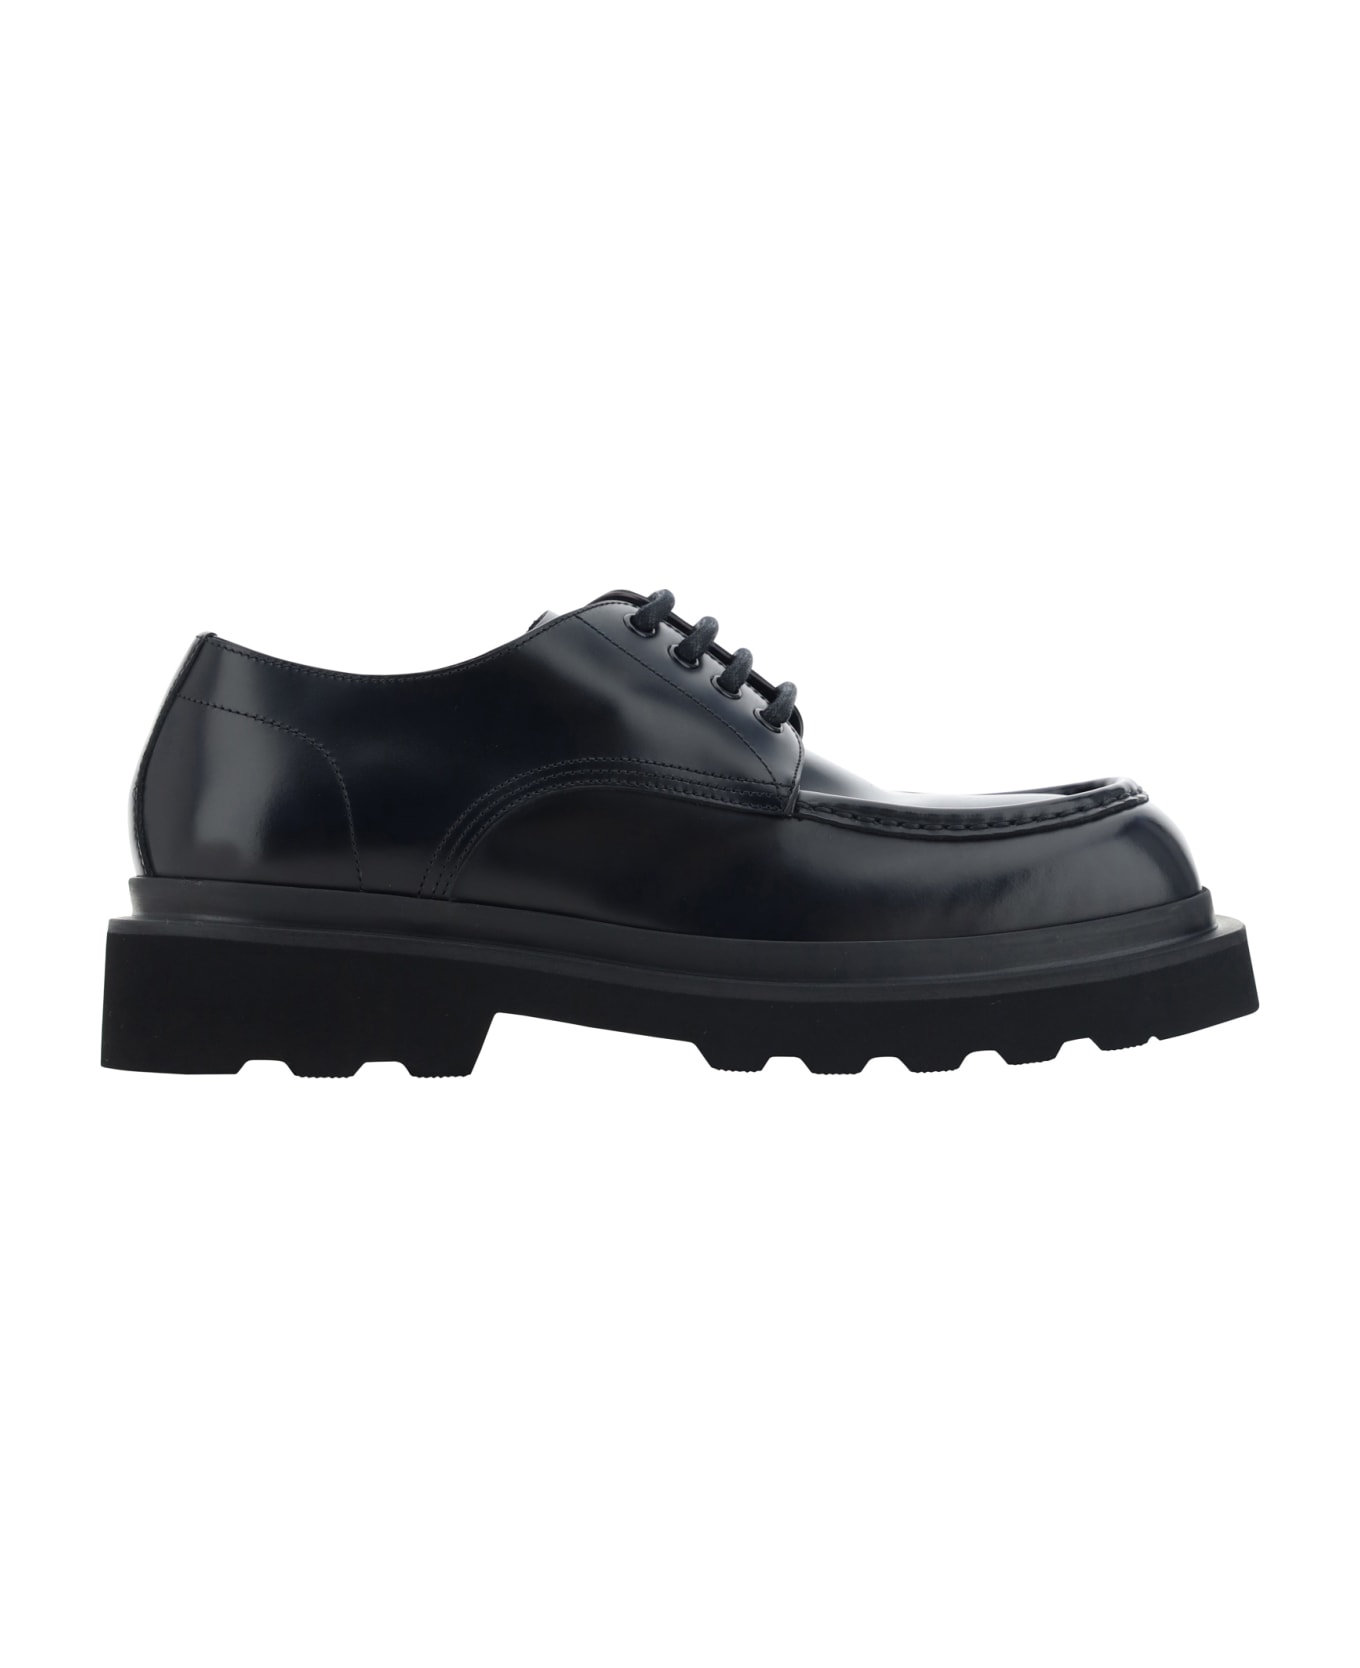 Dolce & Gabbana Derby Lace Up Shoes - Nero ローファー＆デッキシューズ